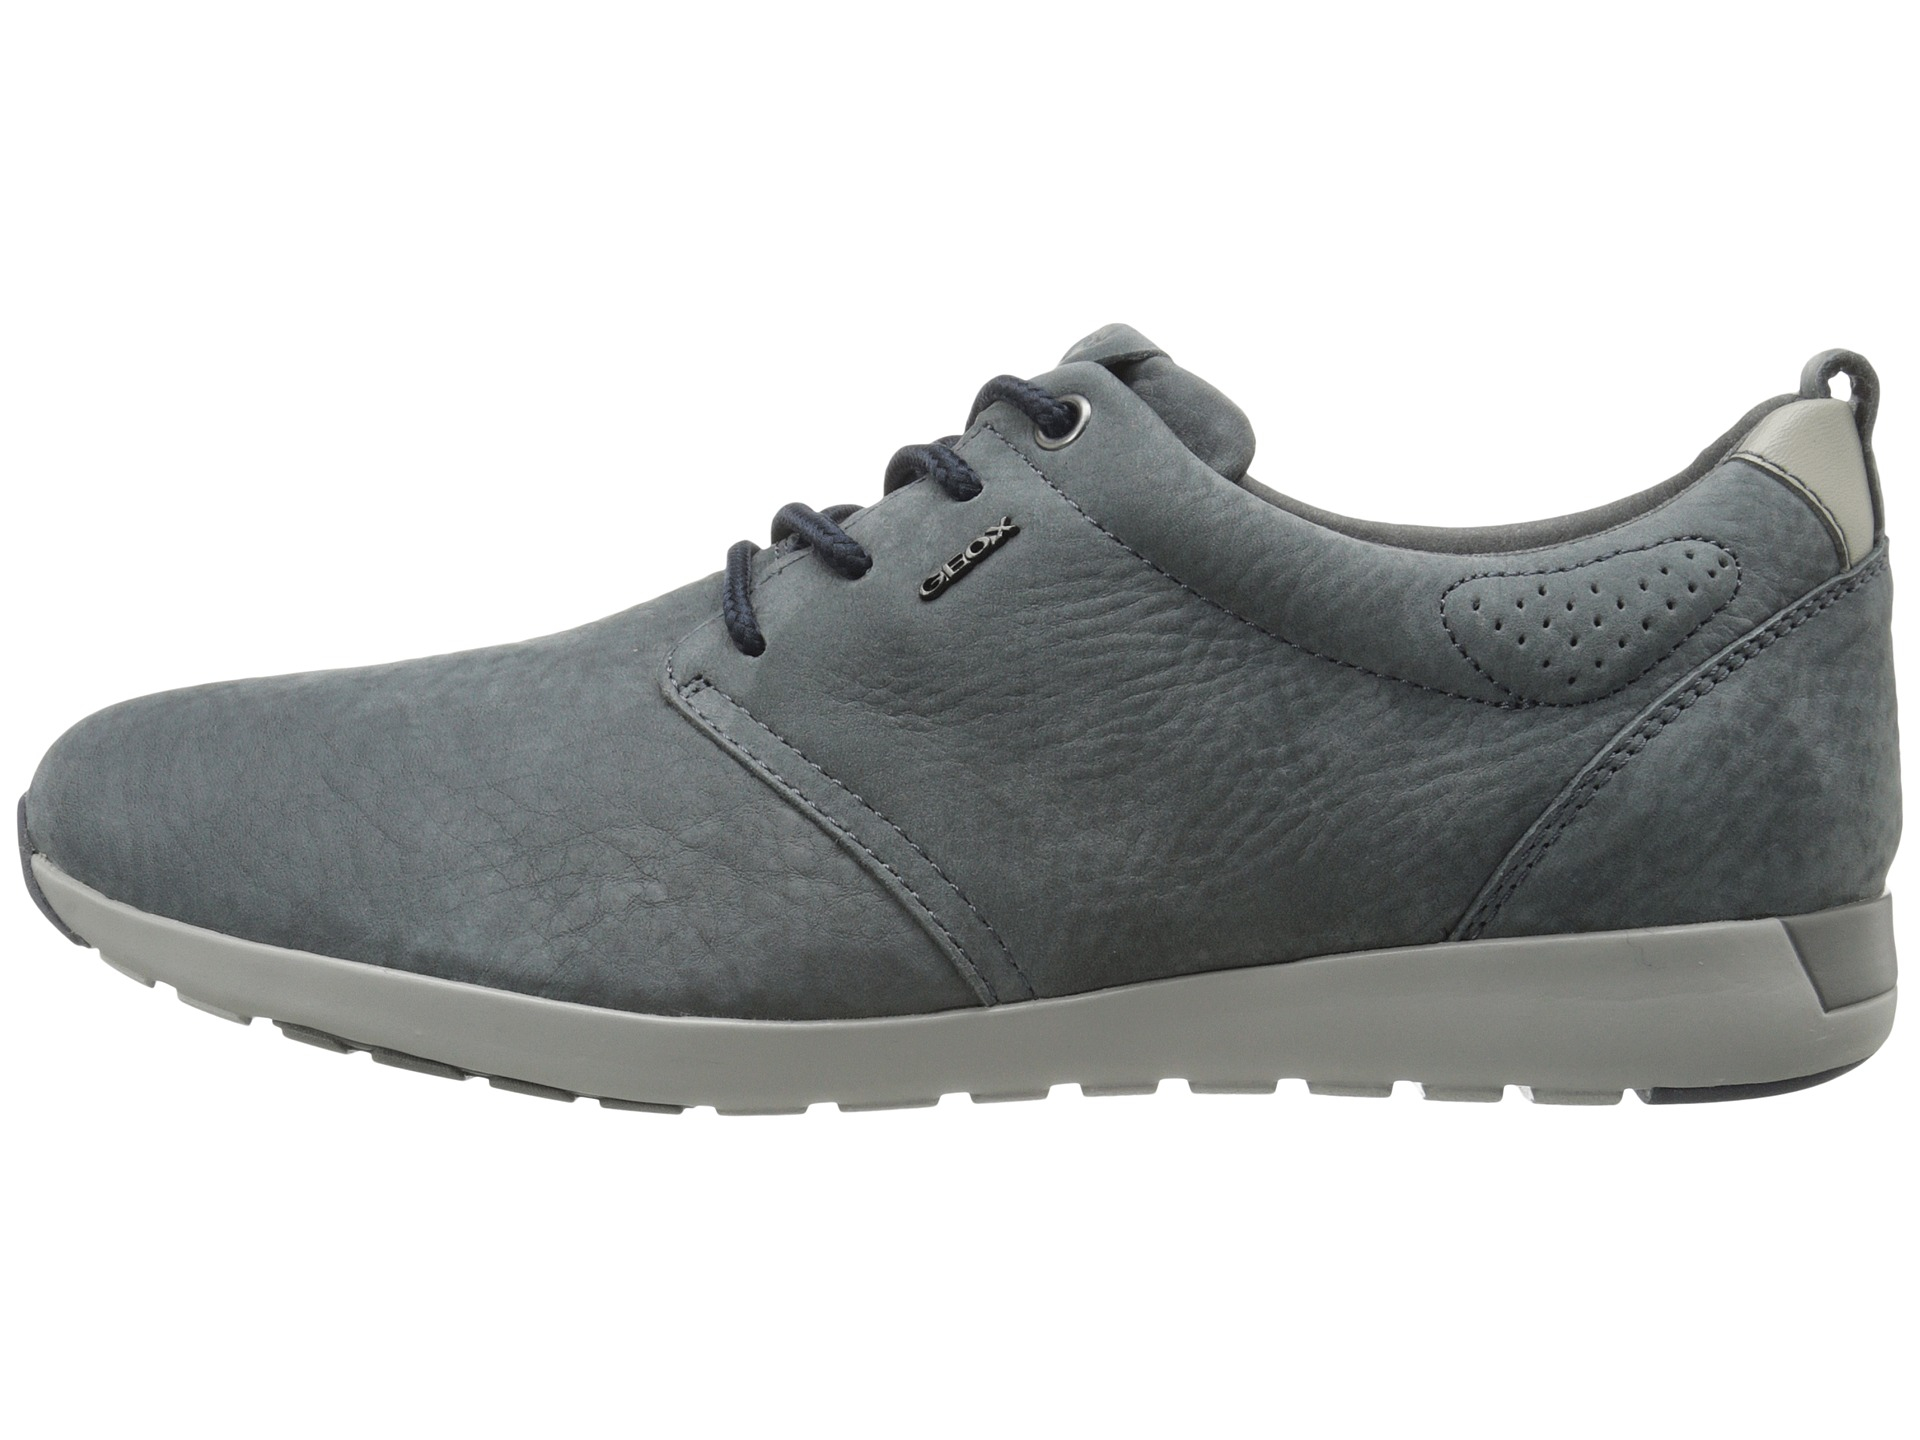 Geox Suede Mjepson1 in Gray for Men - Lyst